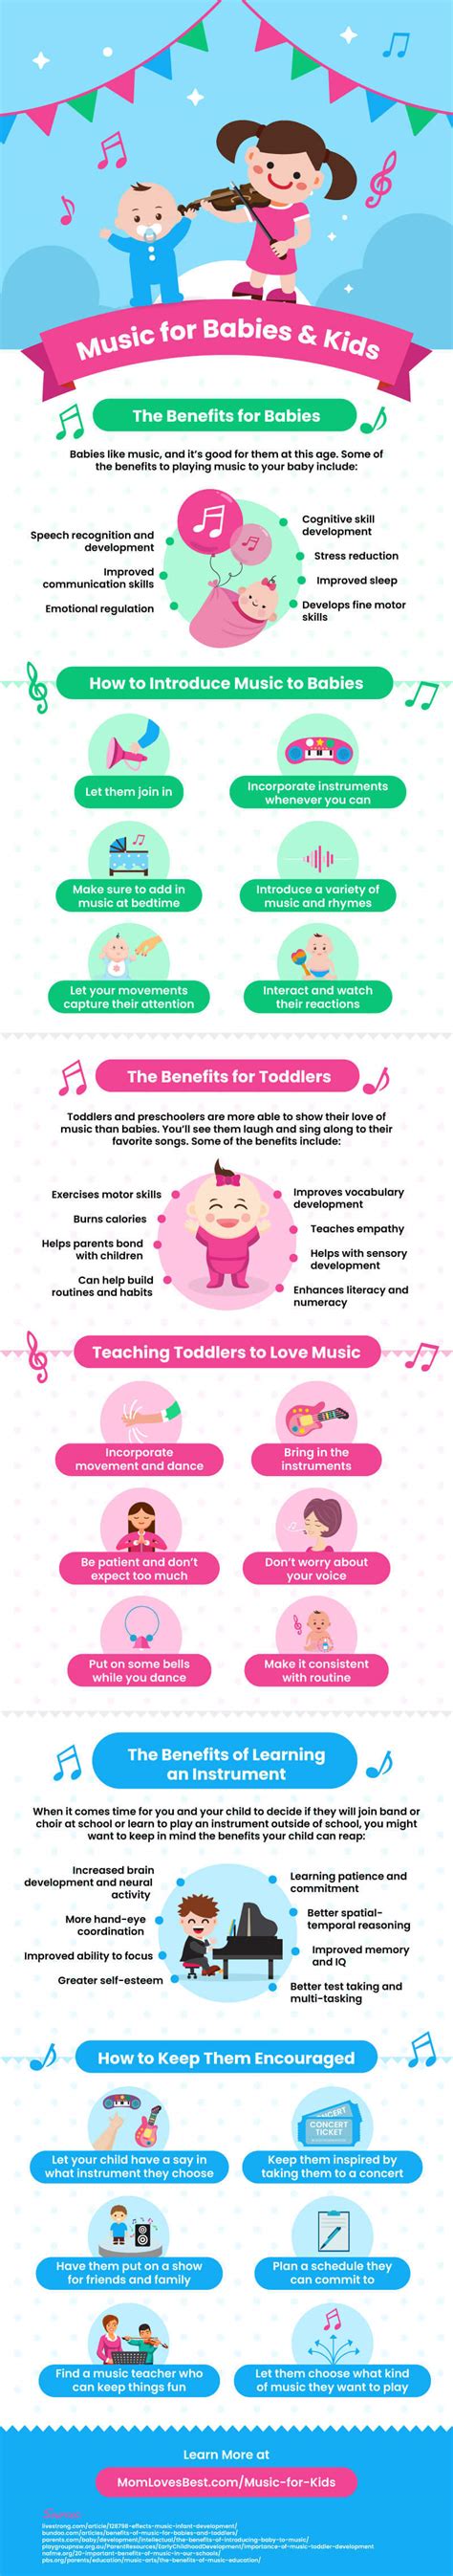 10 Benefits Of Children Learning A Musical Instrument